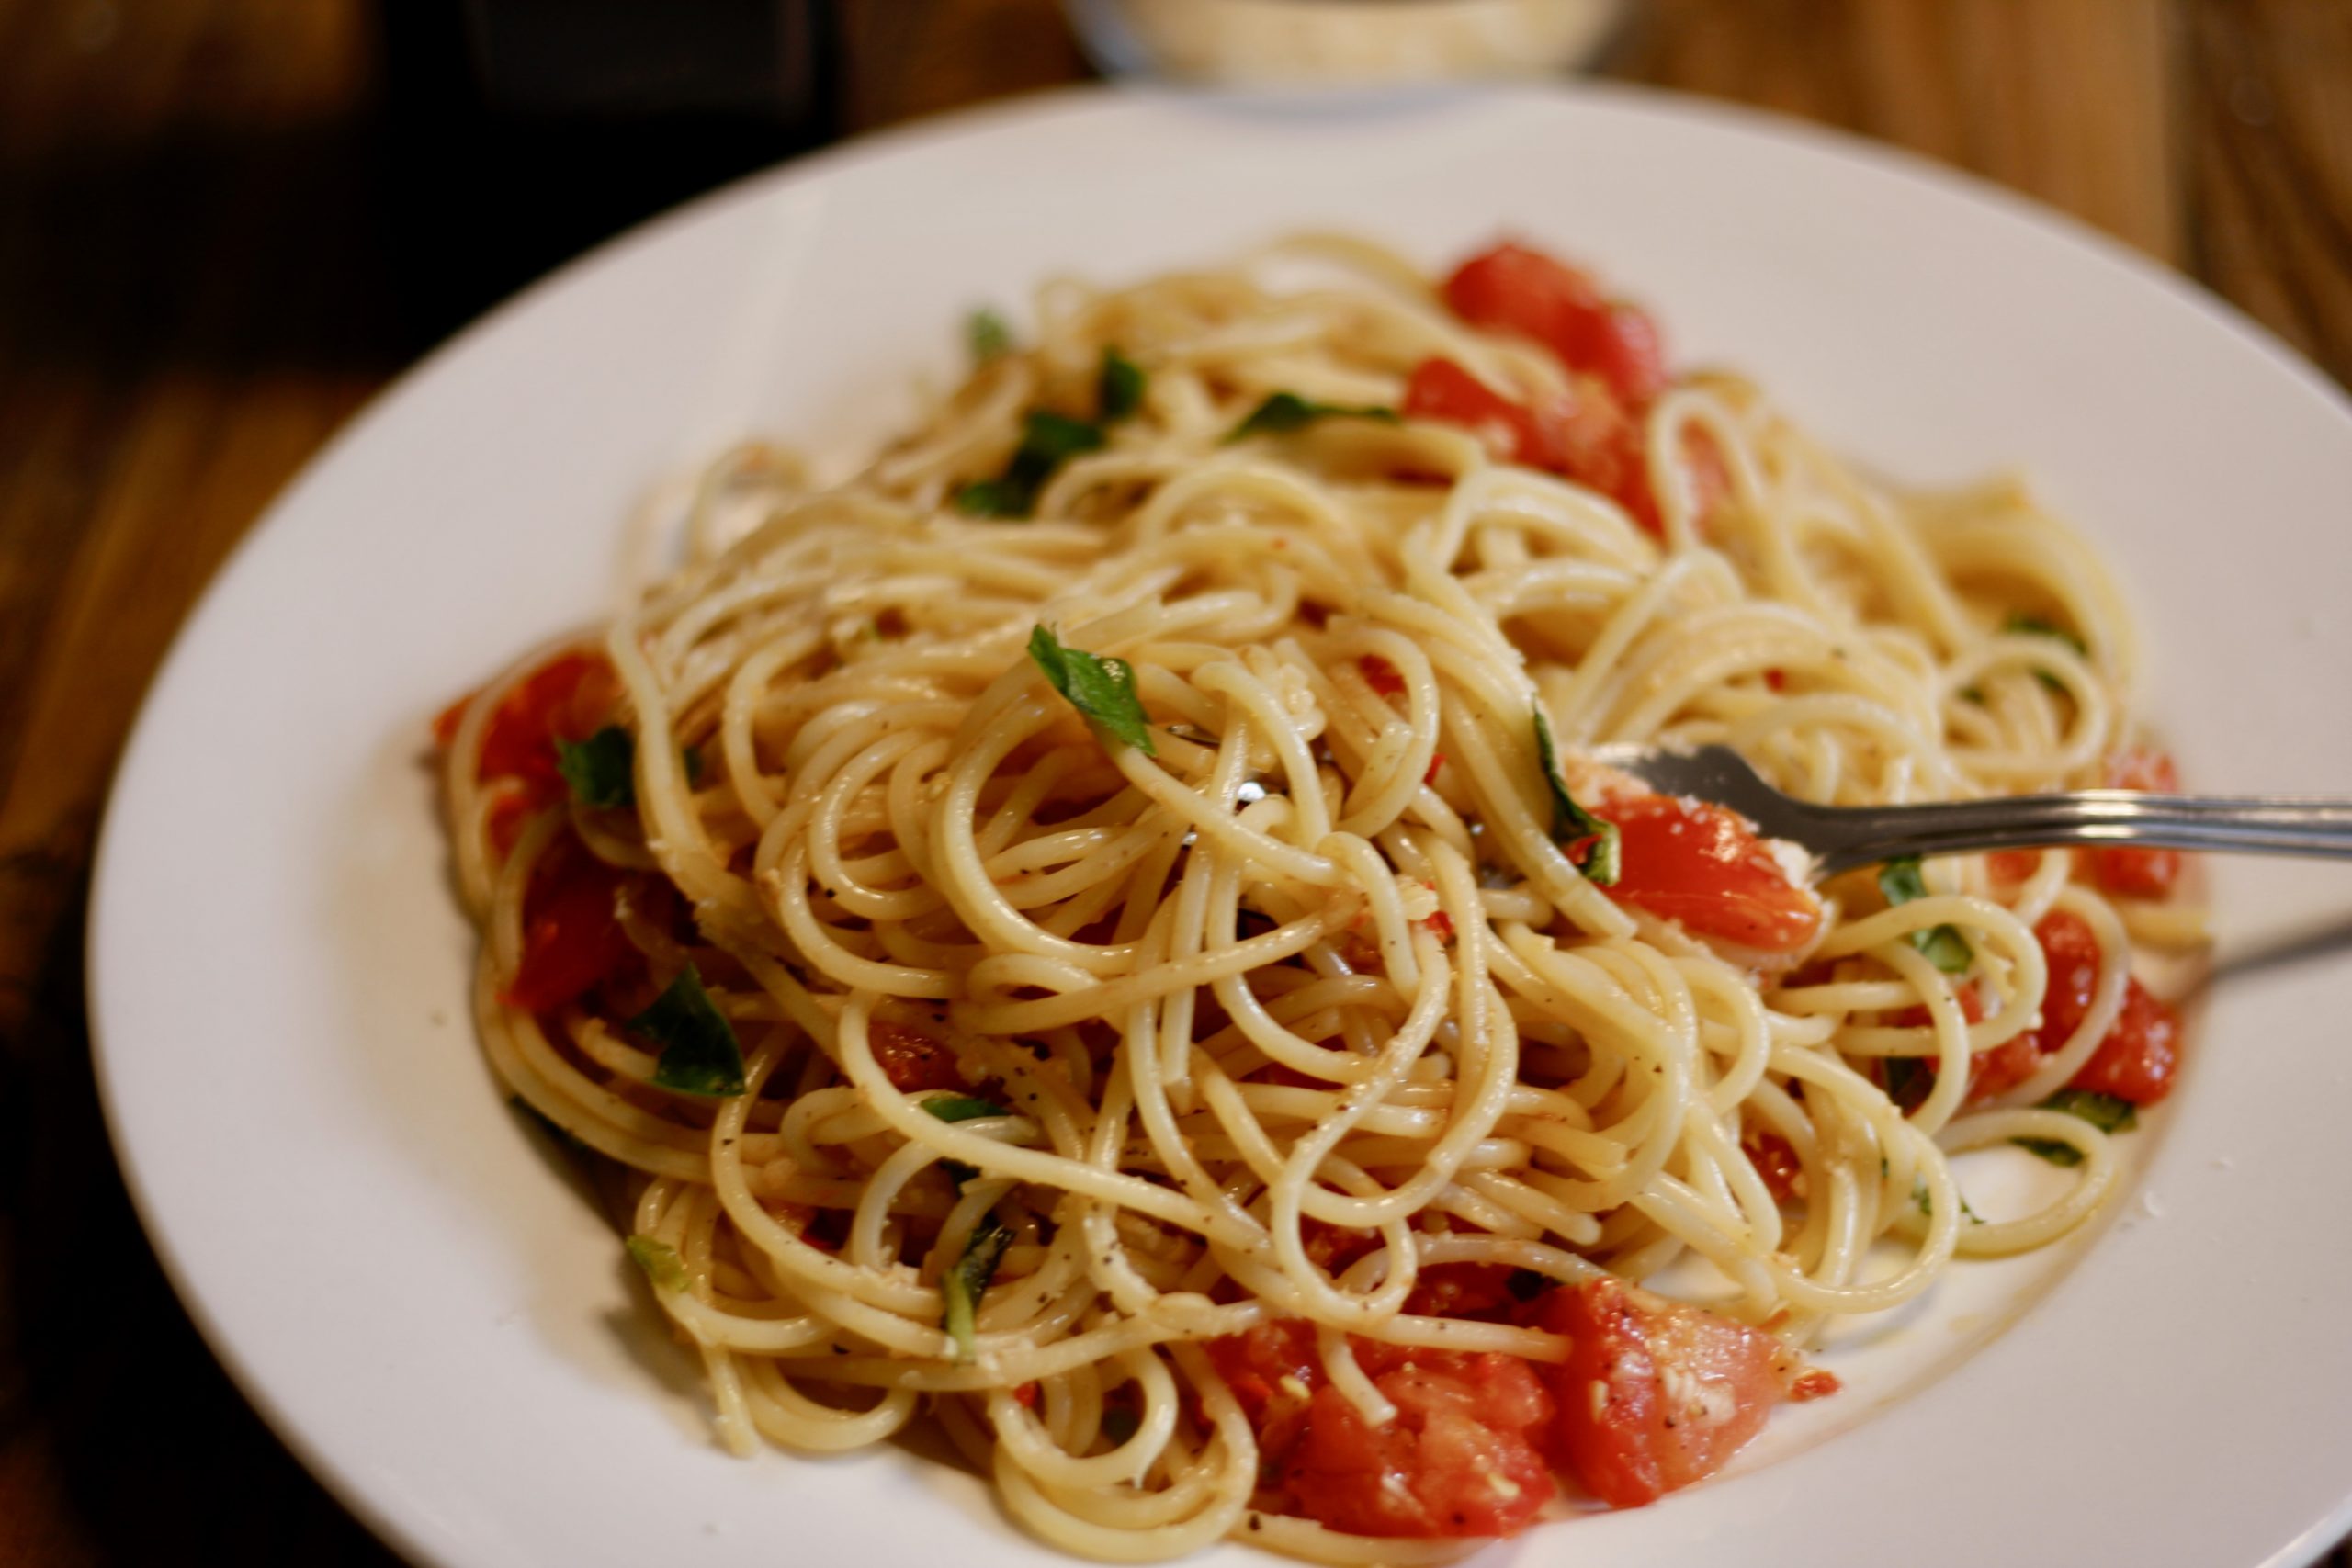 spaghetti with tomatoes and basil leaves topped with grated Parmigiano Reggiano on a white plate